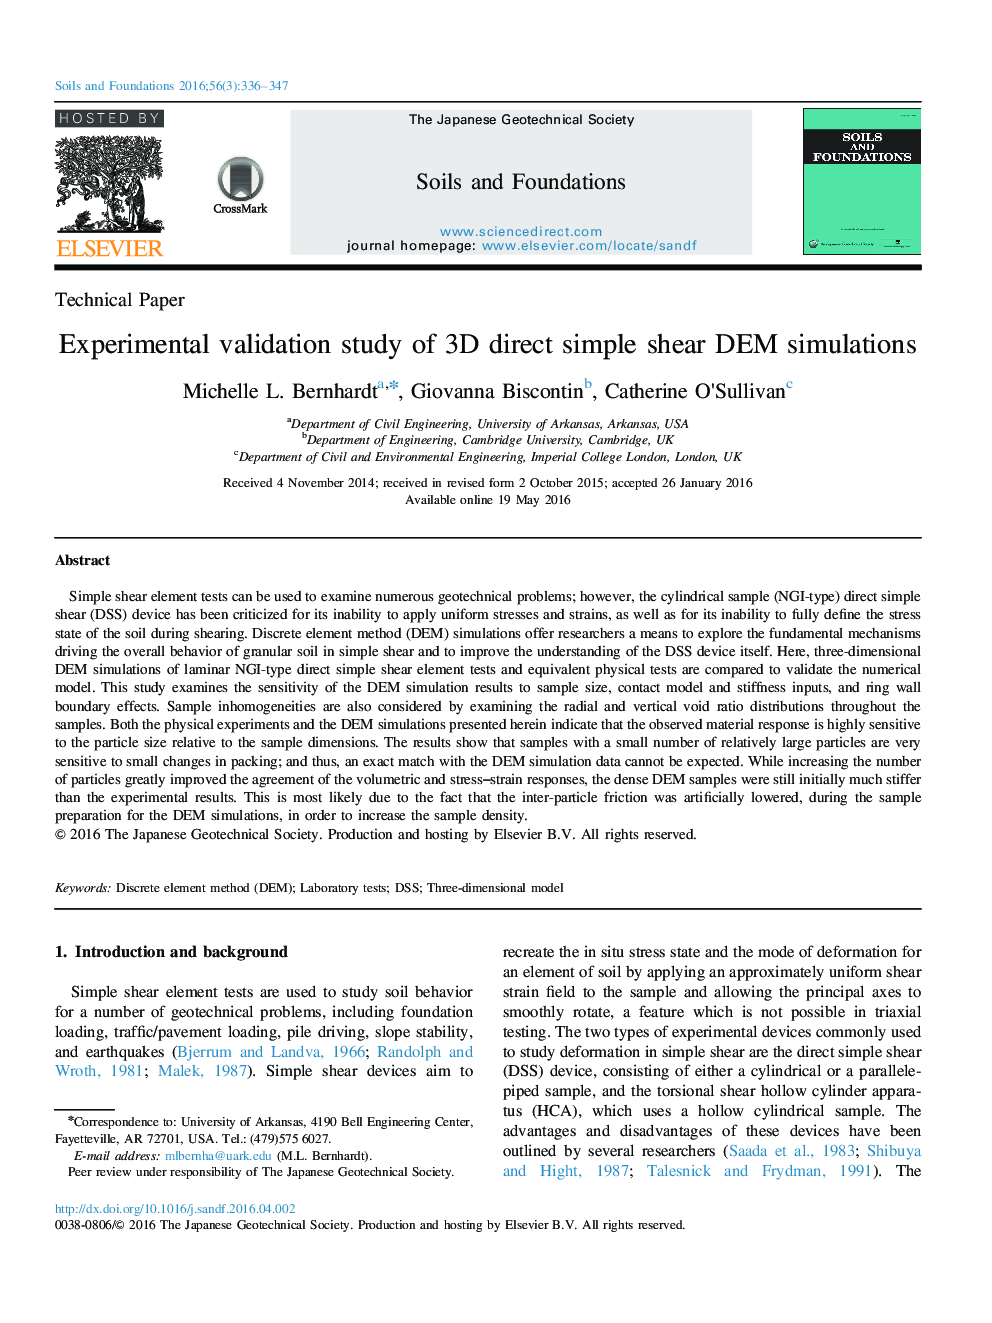 Experimental validation study of 3D direct simple shear DEM simulations